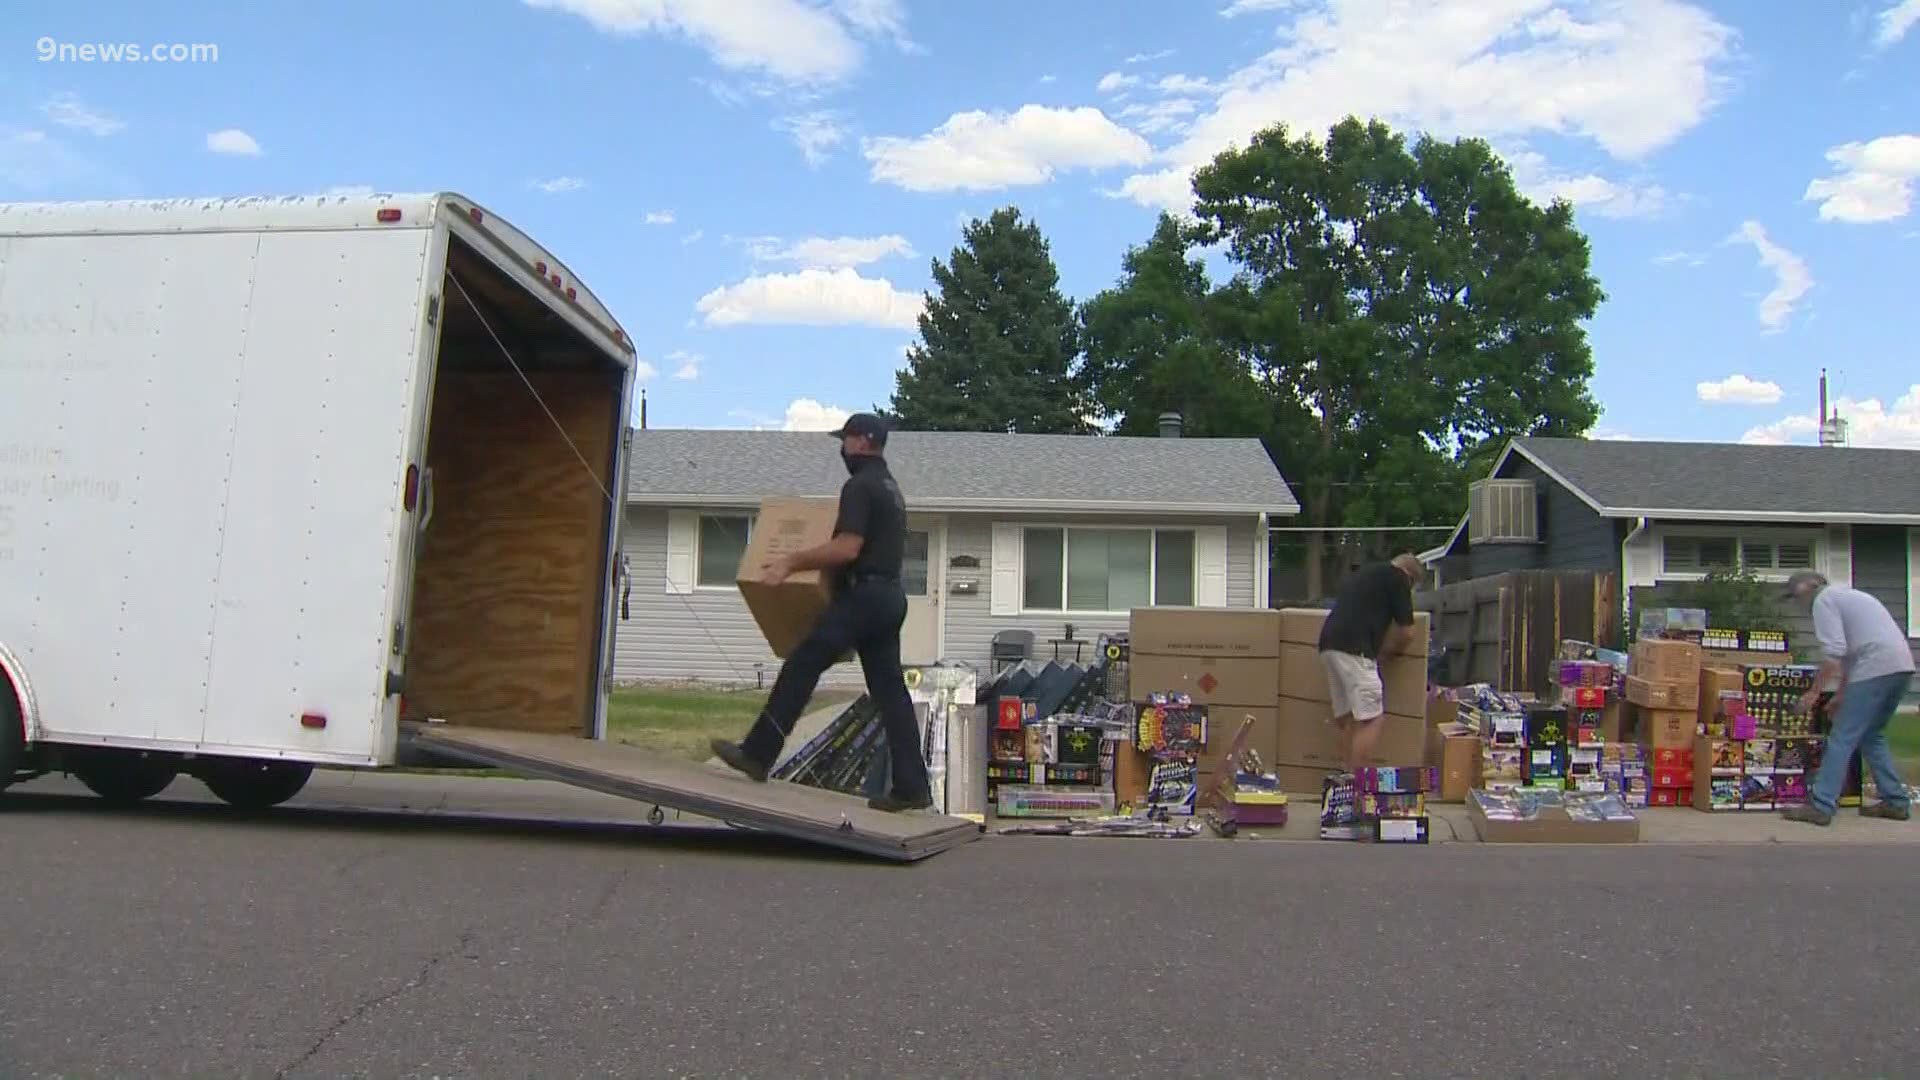 Officers removed fireworks from a home near South Sheridan Boulevard and West Florida Avenue in southwest Denver.